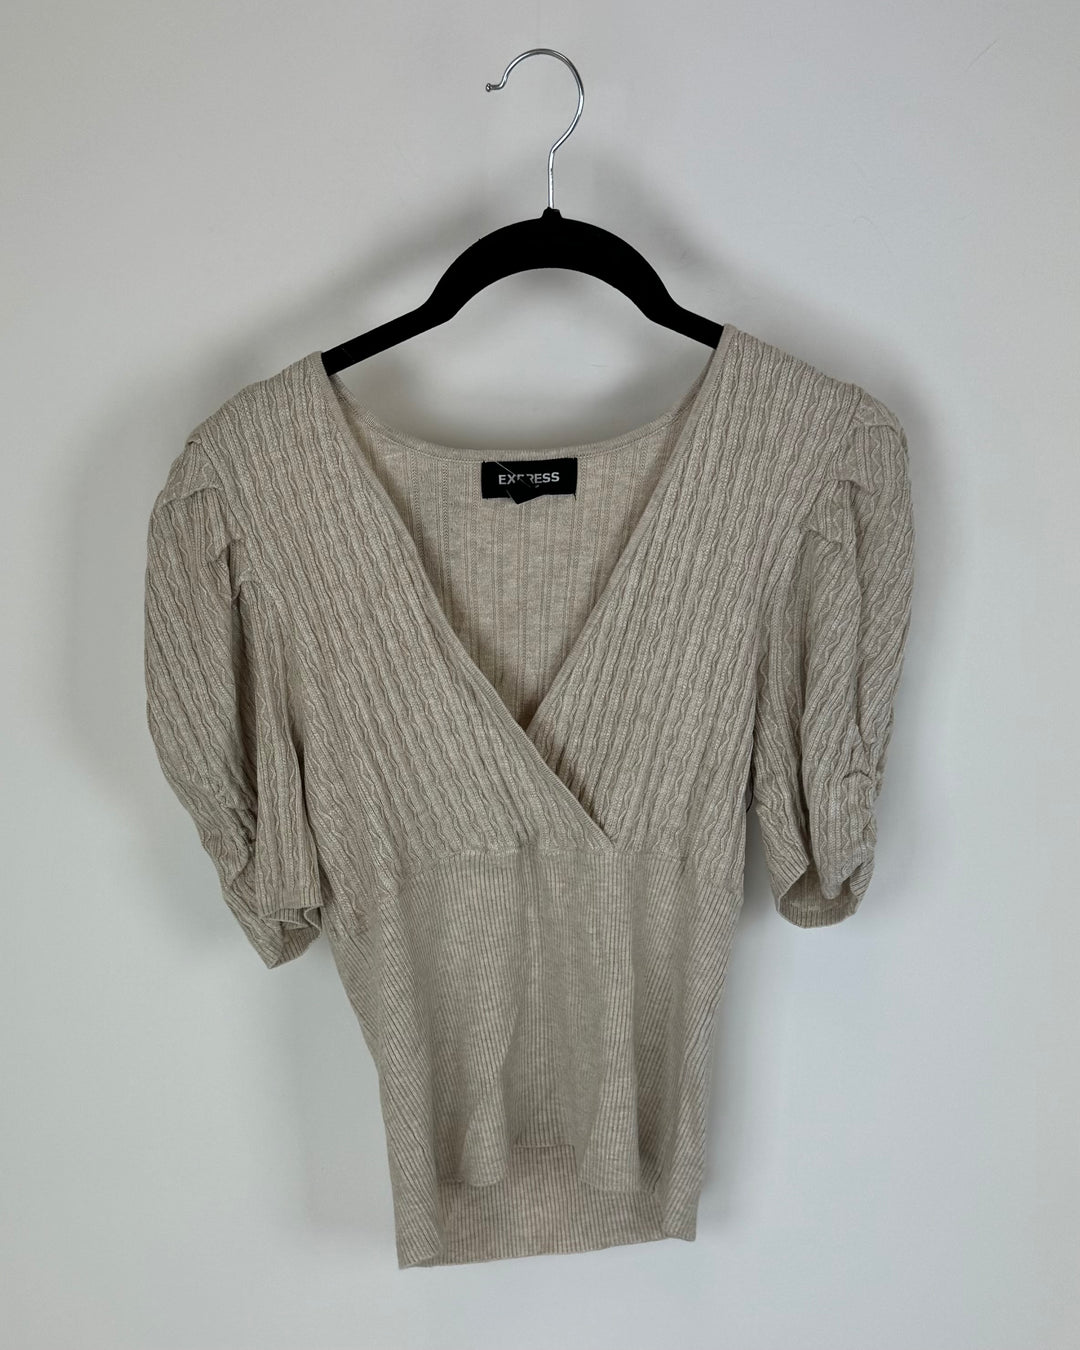 Beige Fitted Sweater - Small